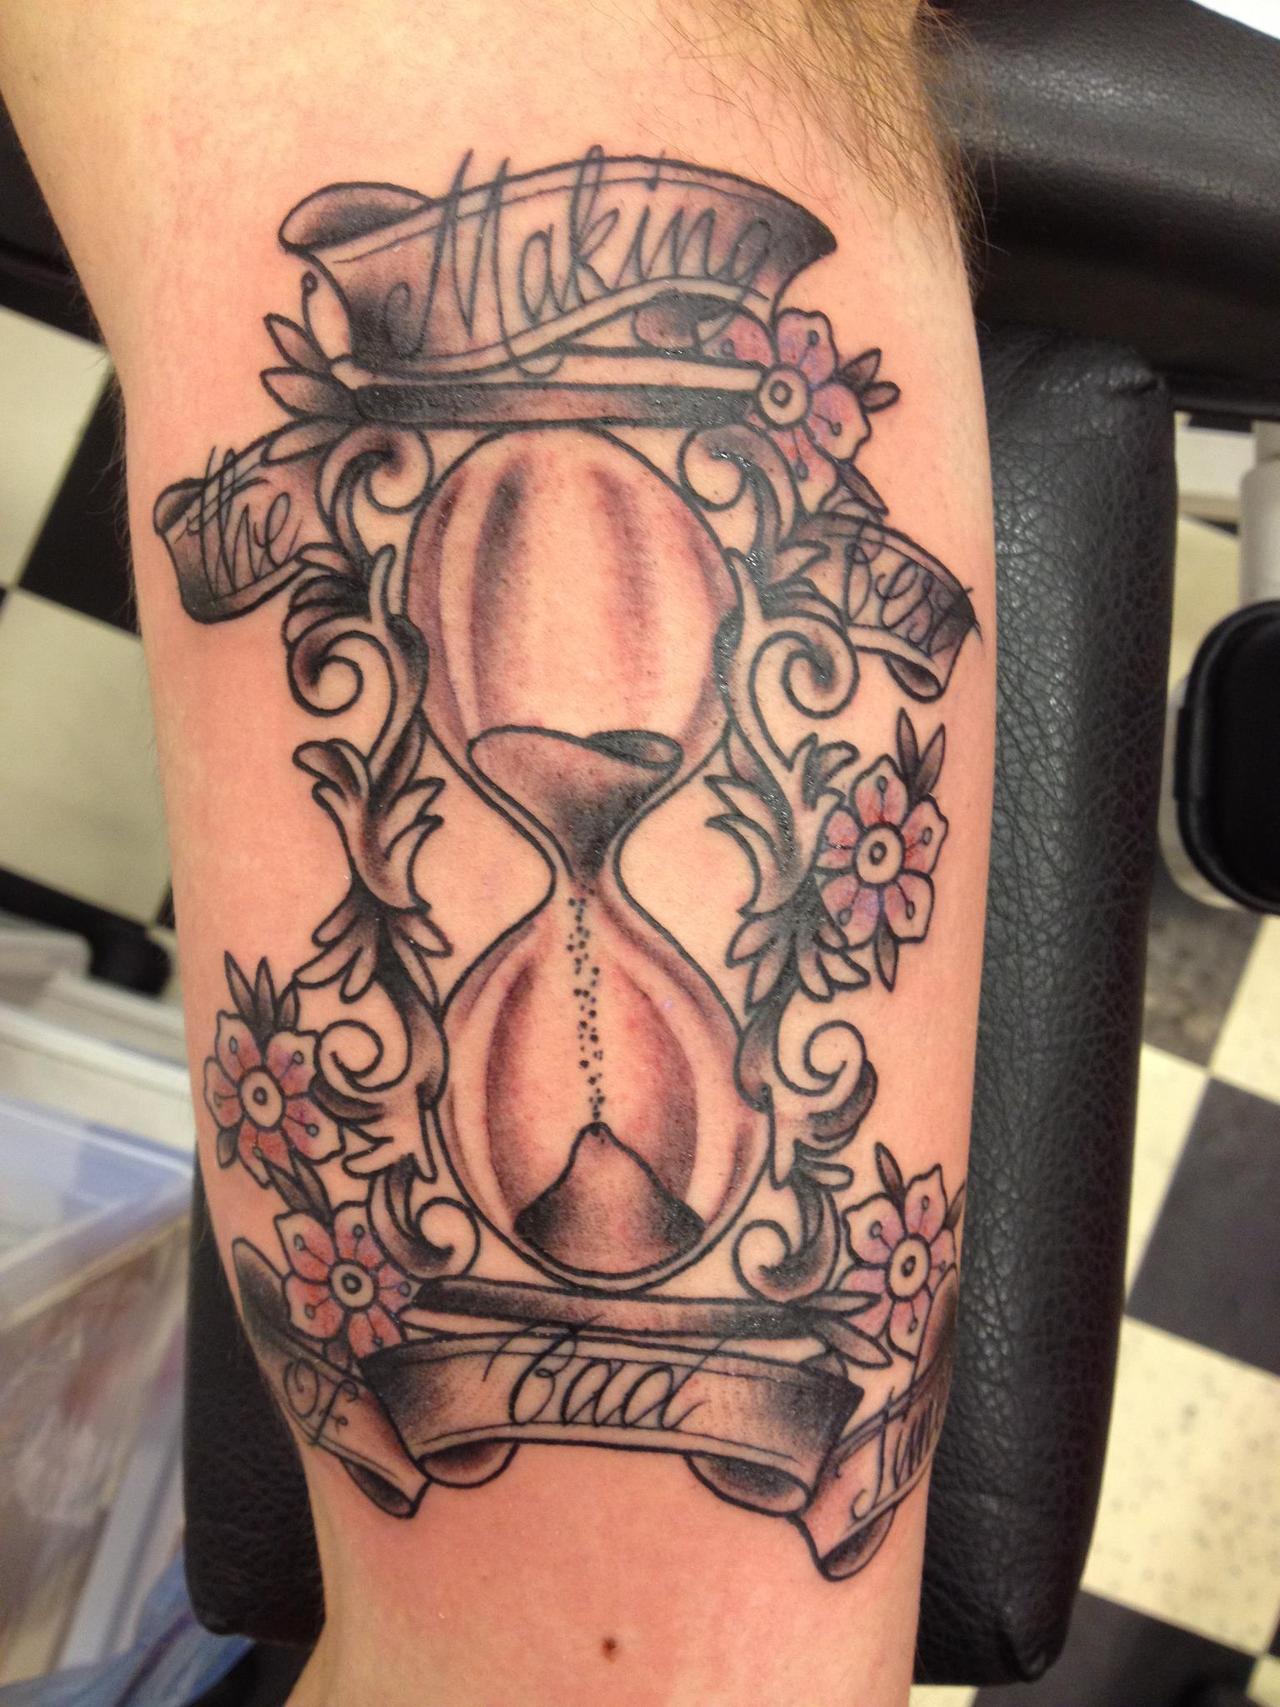 Hourglass Tattoos Designs, Ideas and Meaning | Tattoos For You